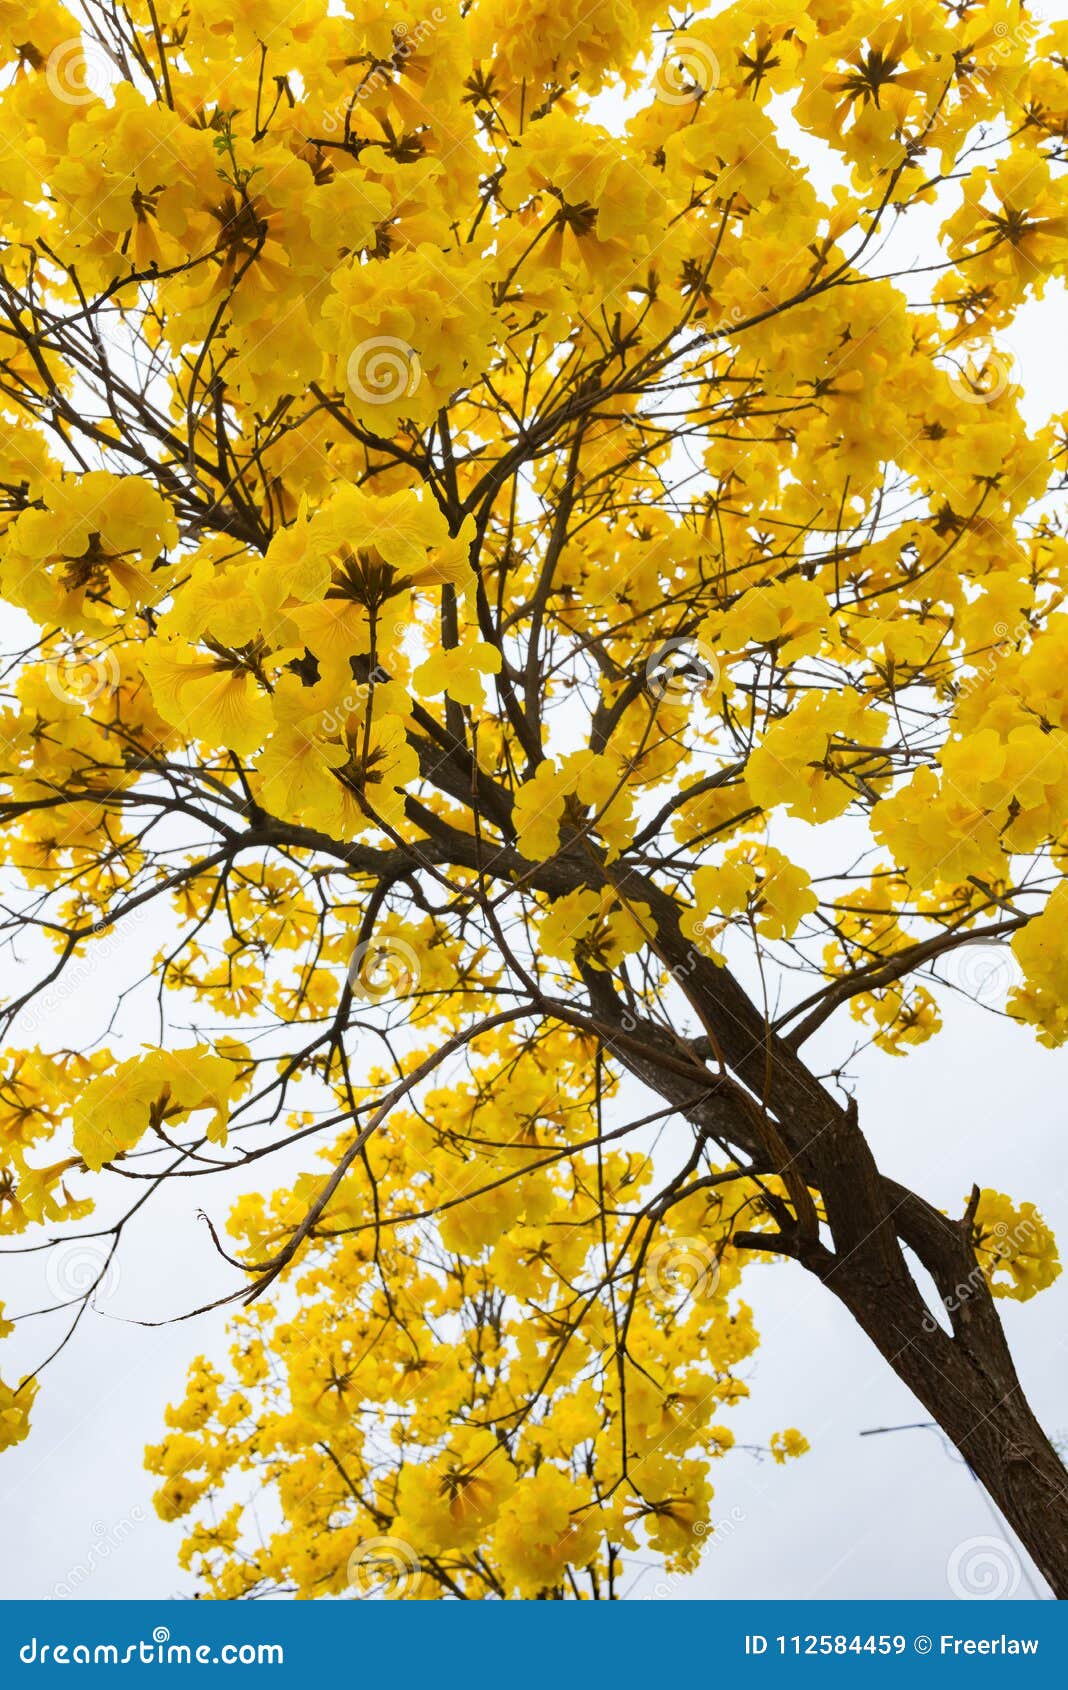 guayacan or handroanthus chrysanthus tree